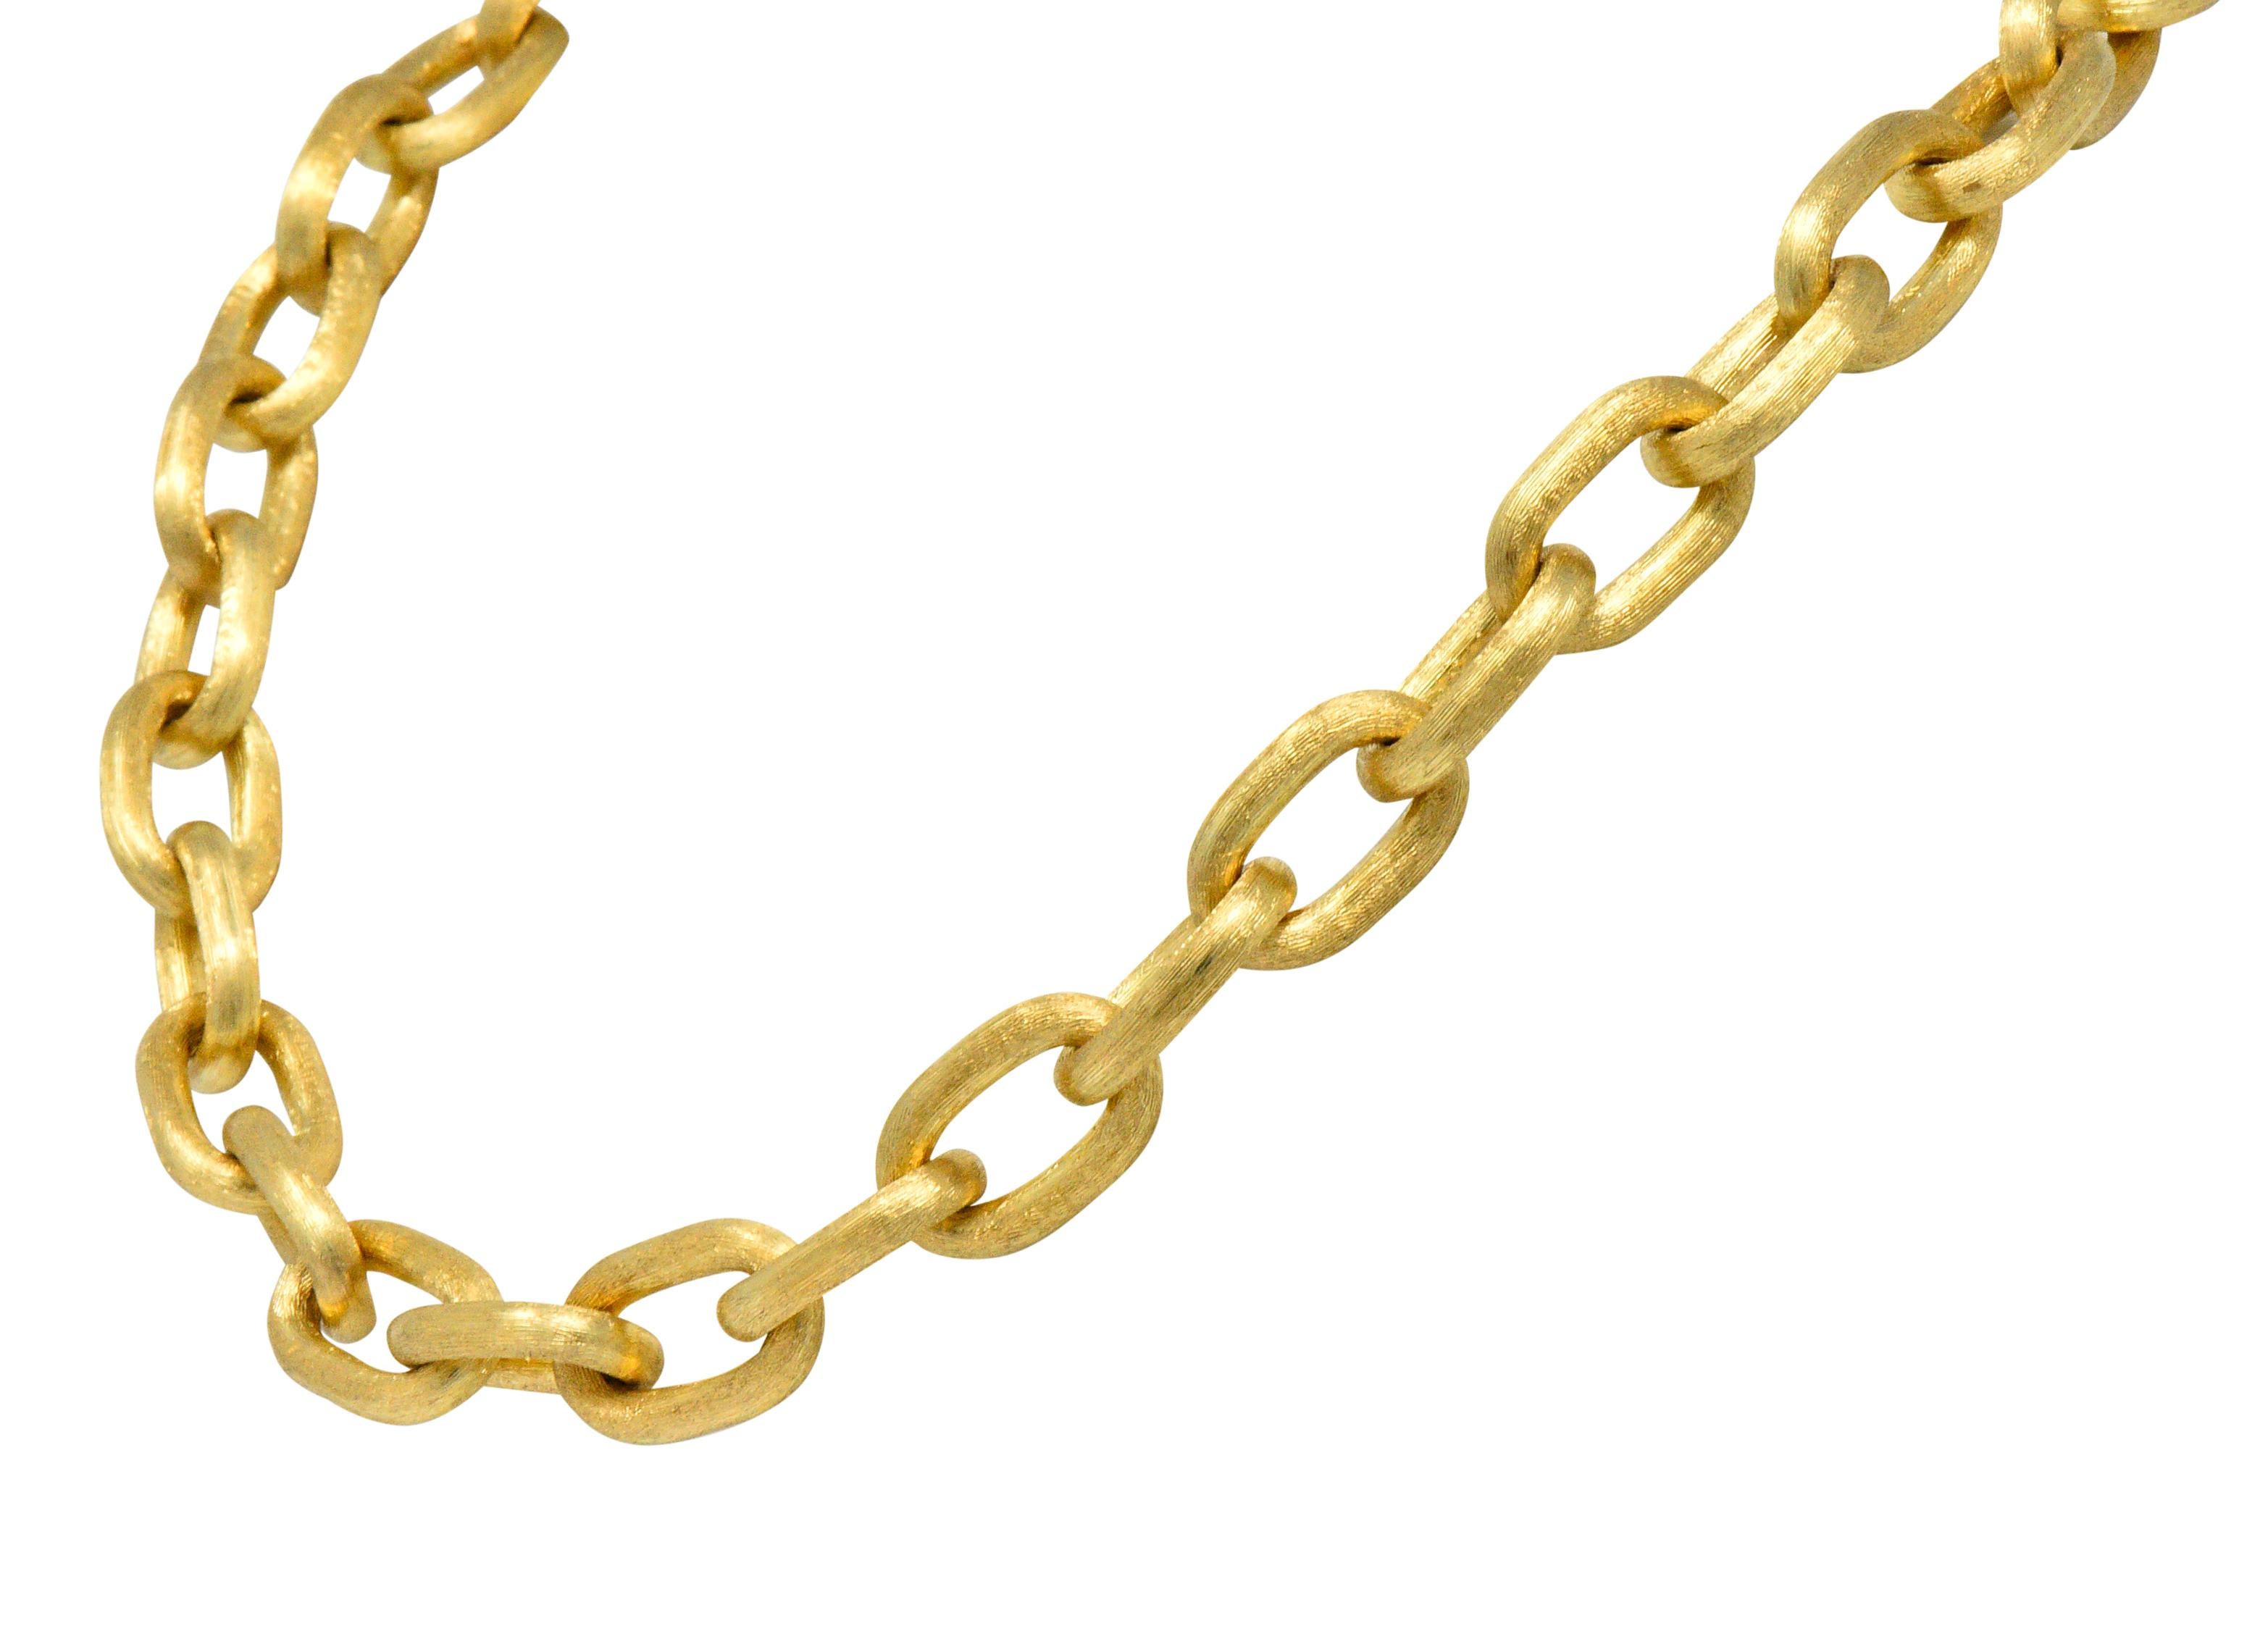 Necklace featuring large hollow oval links with a strong brushed finish

Completed by a concealed hinged clasp with figure-eight safety

Stamped Italy and 18kt for 18 karat gold

Length: 18 1/2 inches

Width: 1/2 (widest) inch

Total weight: 58.3